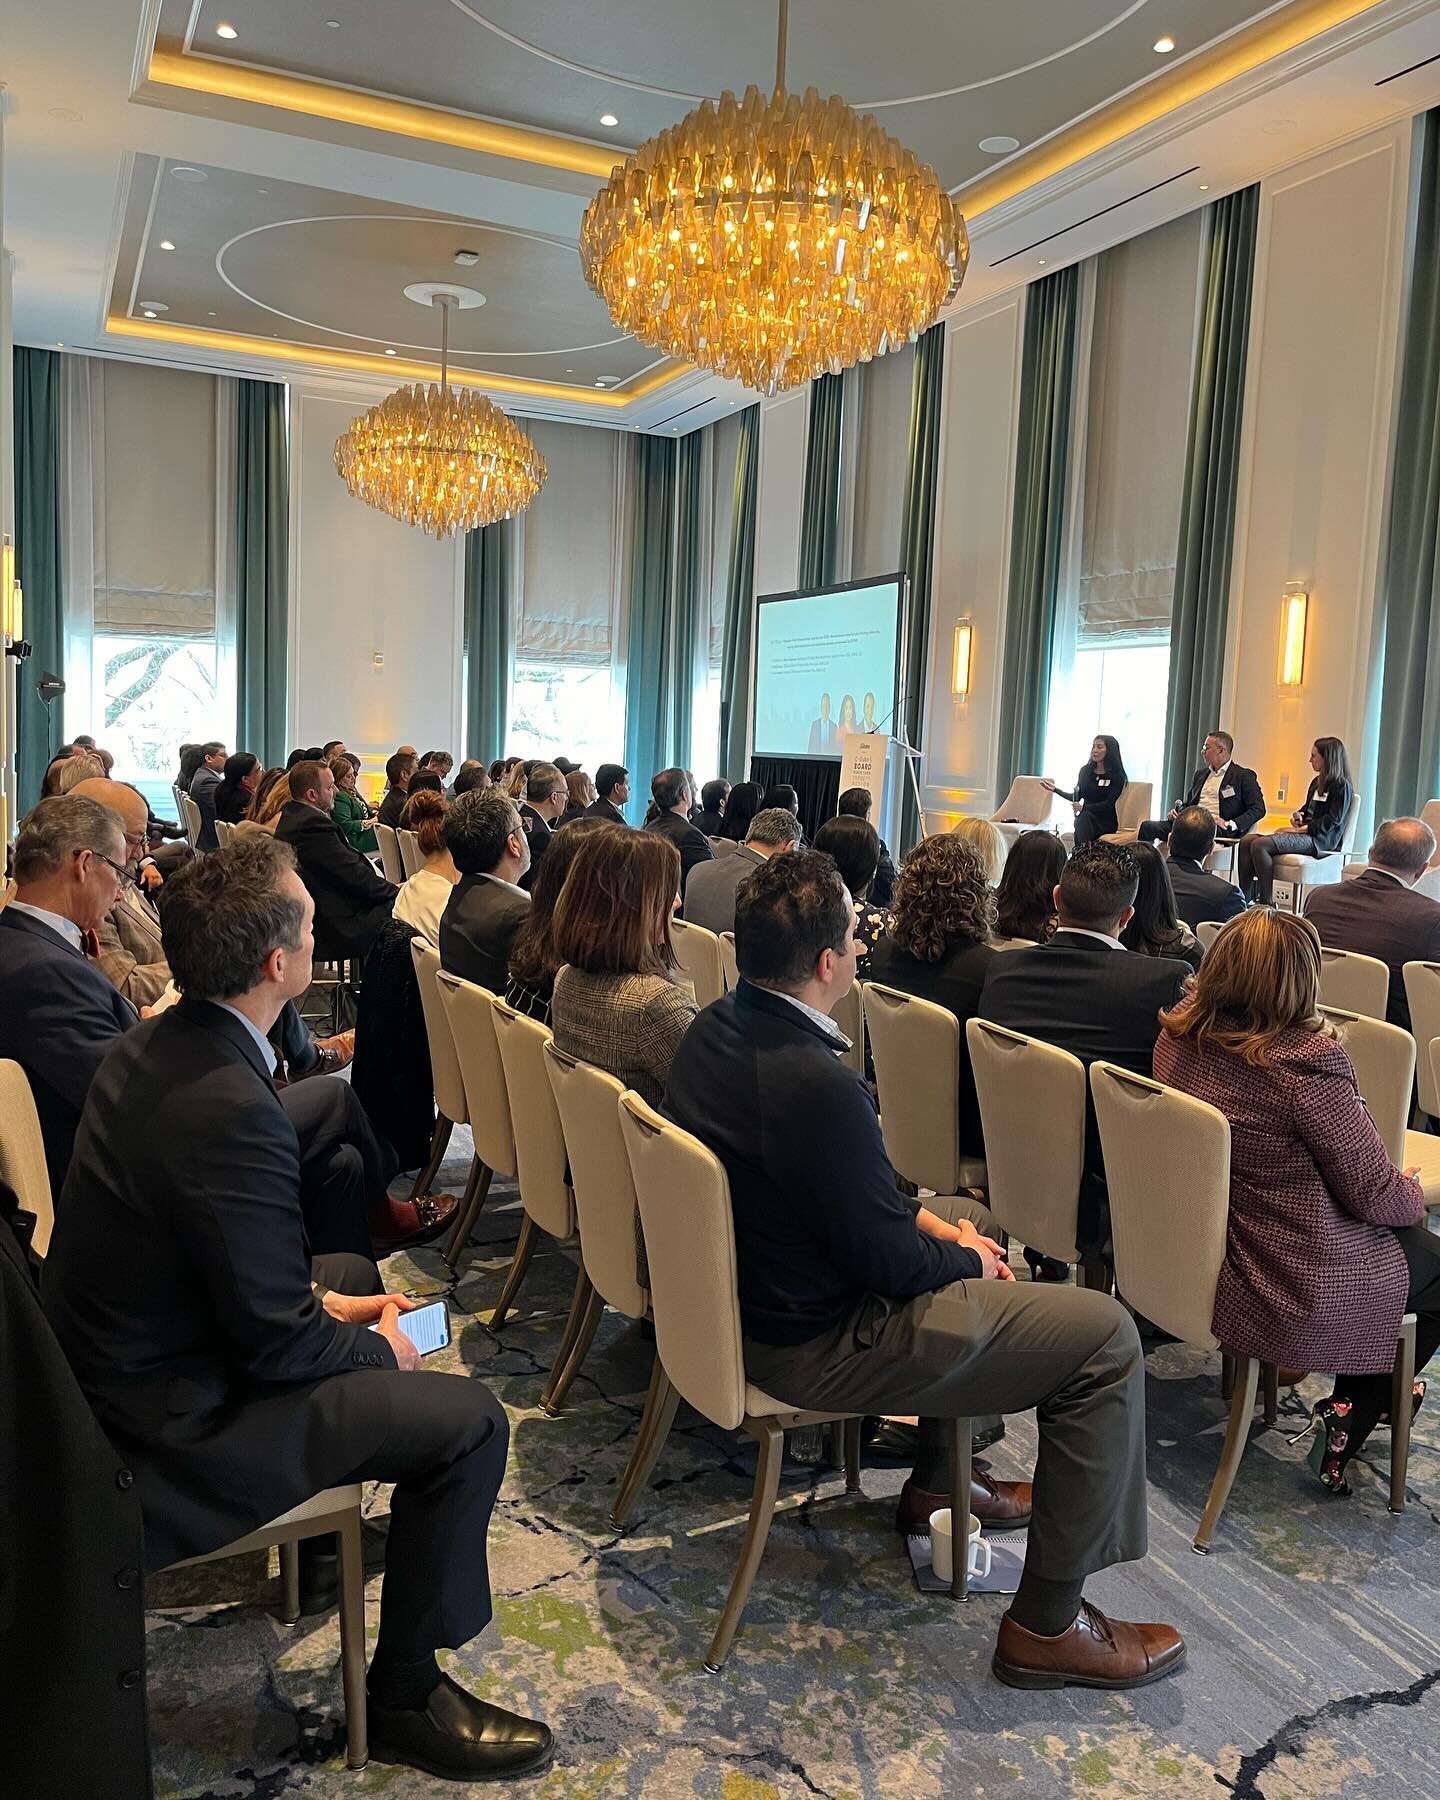 Last week, we were in Boston for the second time hosting our annual &lsquo;C-Suite &amp; Board Forum&rsquo; in alliance with LCDA. This was an insightful event where the speakers shared the importance of diversity in the corporate world.

We are grat